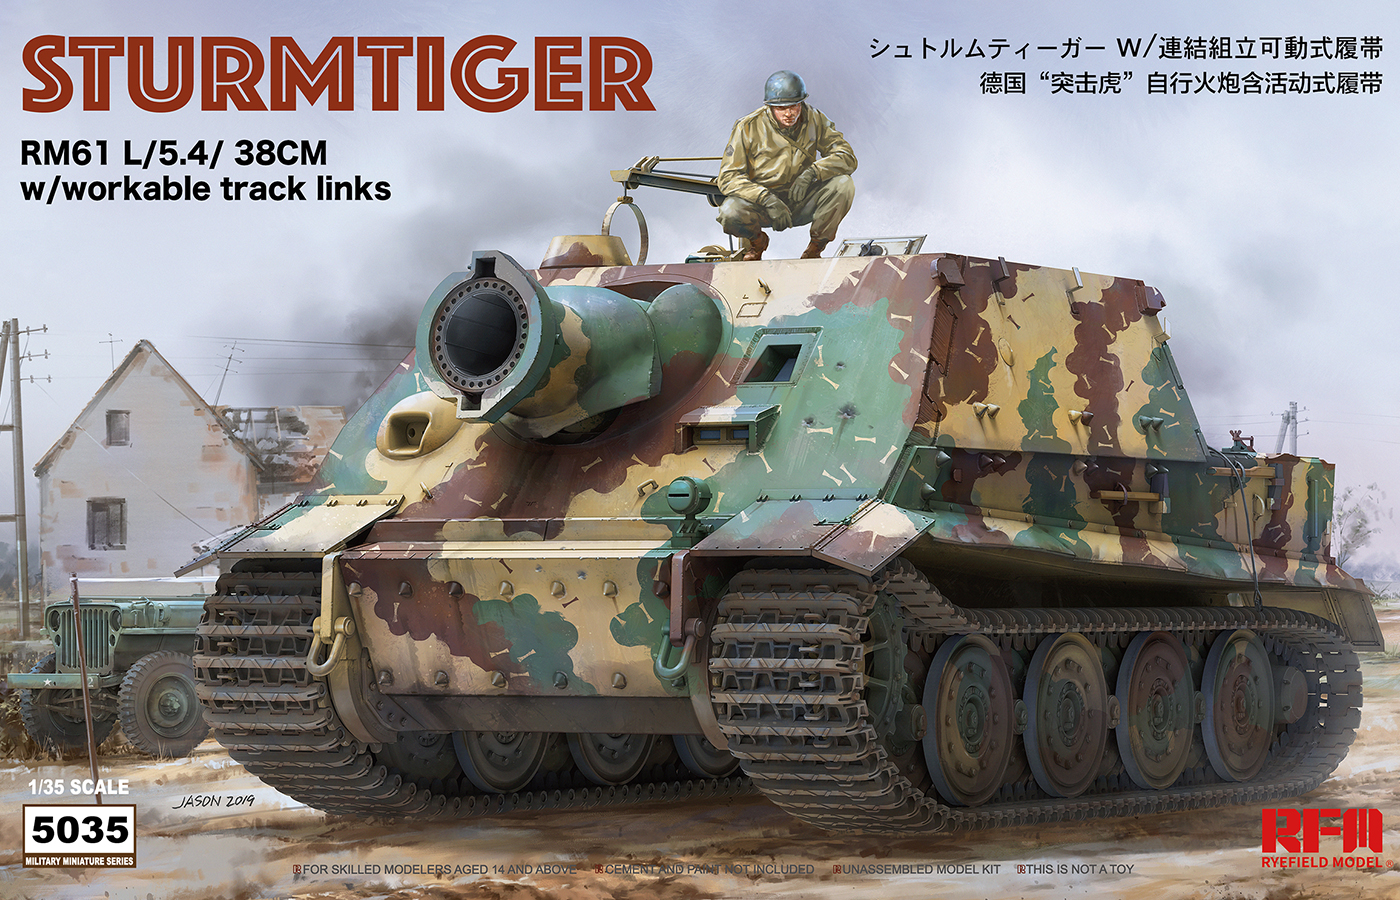 Sturmtiger RM61 L/5.4/ 38cm with Workable Track Links